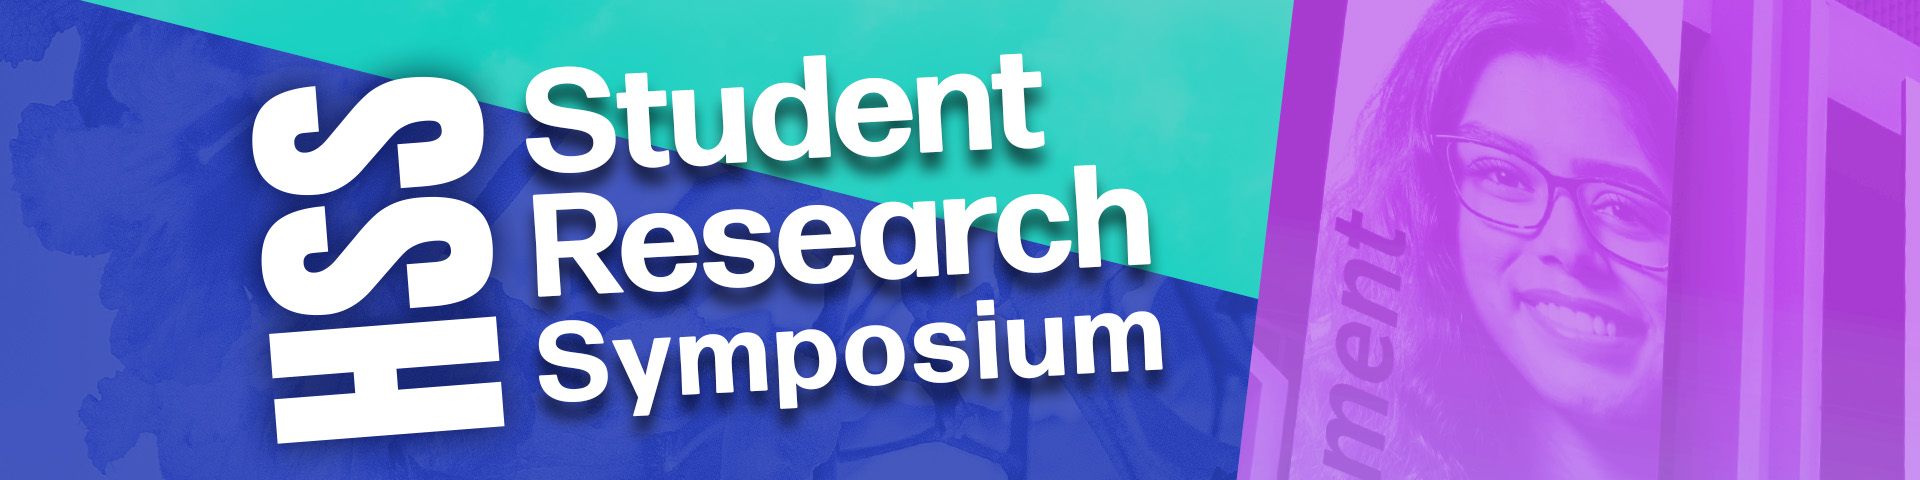 HSS Student Research Symposium